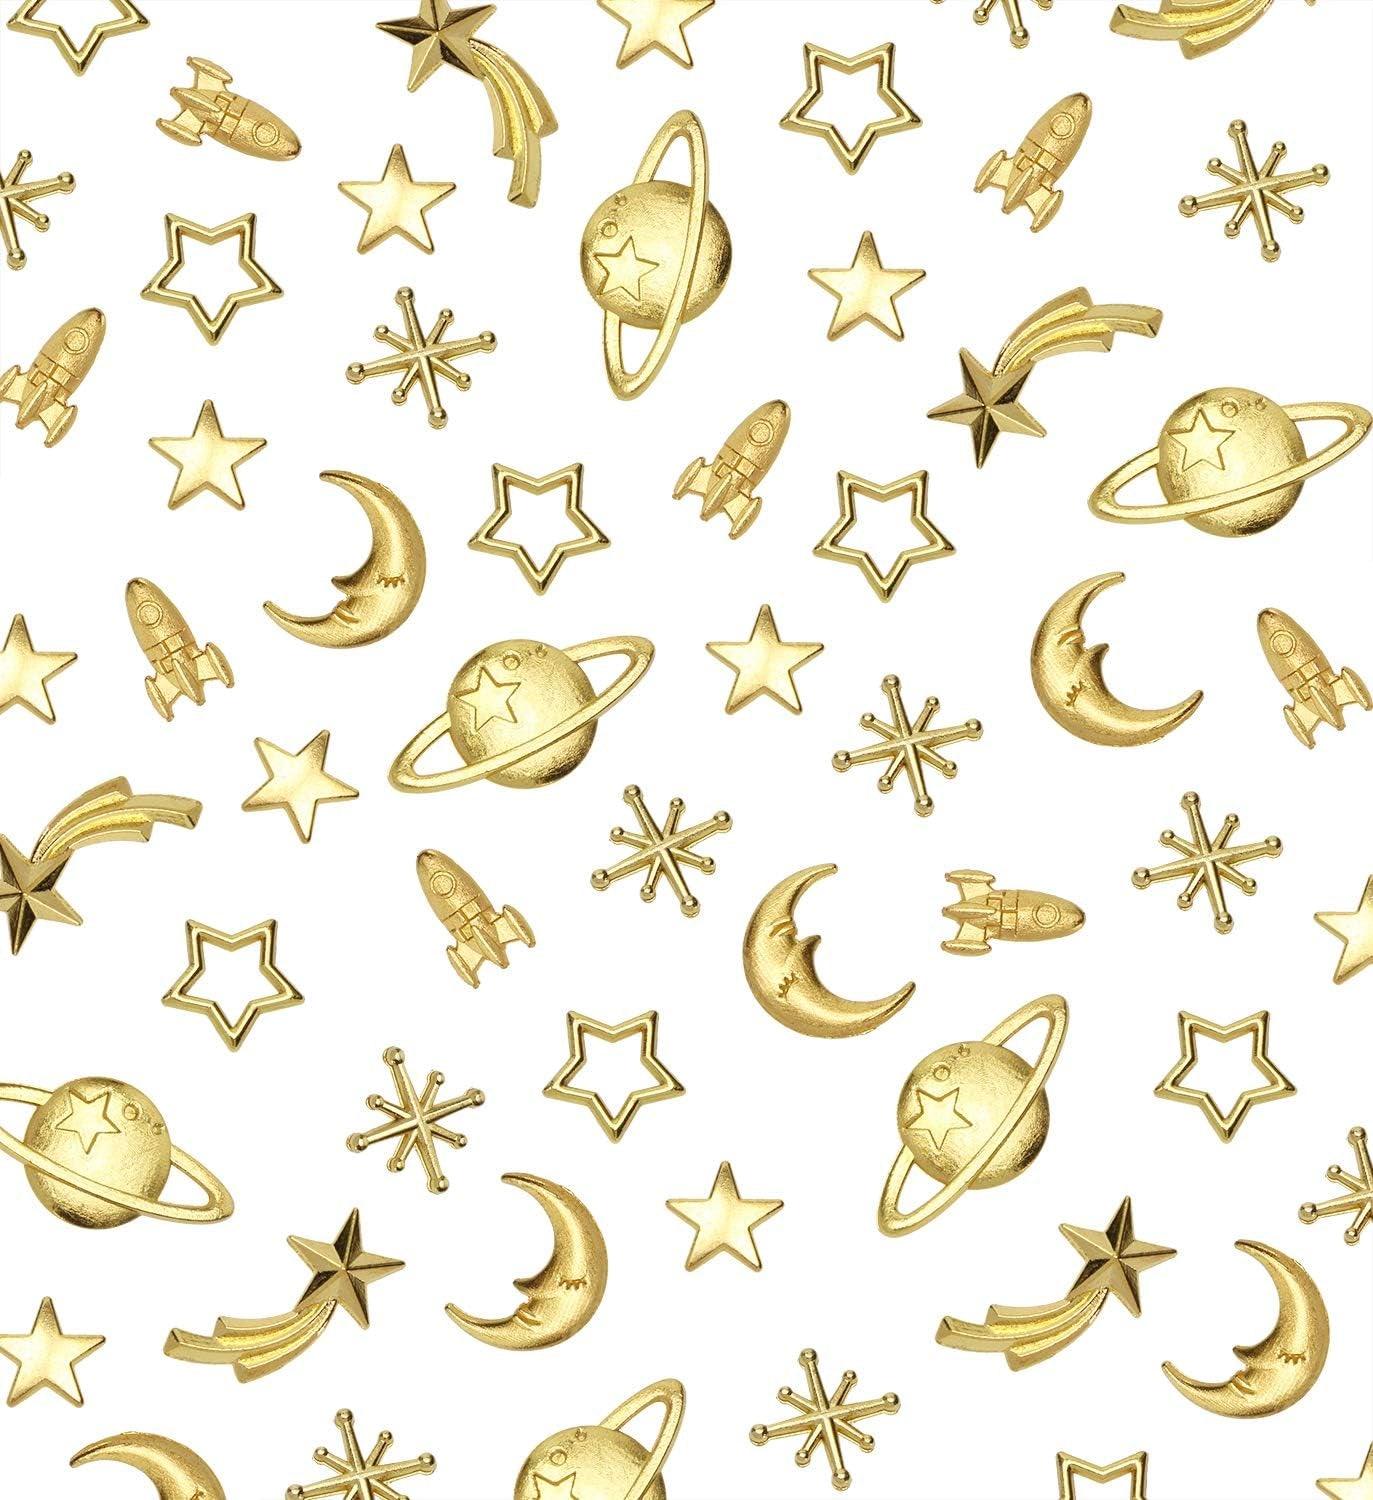 Cosmos Themed Resin Fillers Charms Beads 42Pcs Gold Alloy Star Moon Planet Filling Accessories for Epoxy Resin Craft Jewelry Making (Gold) - WoodArtSupply